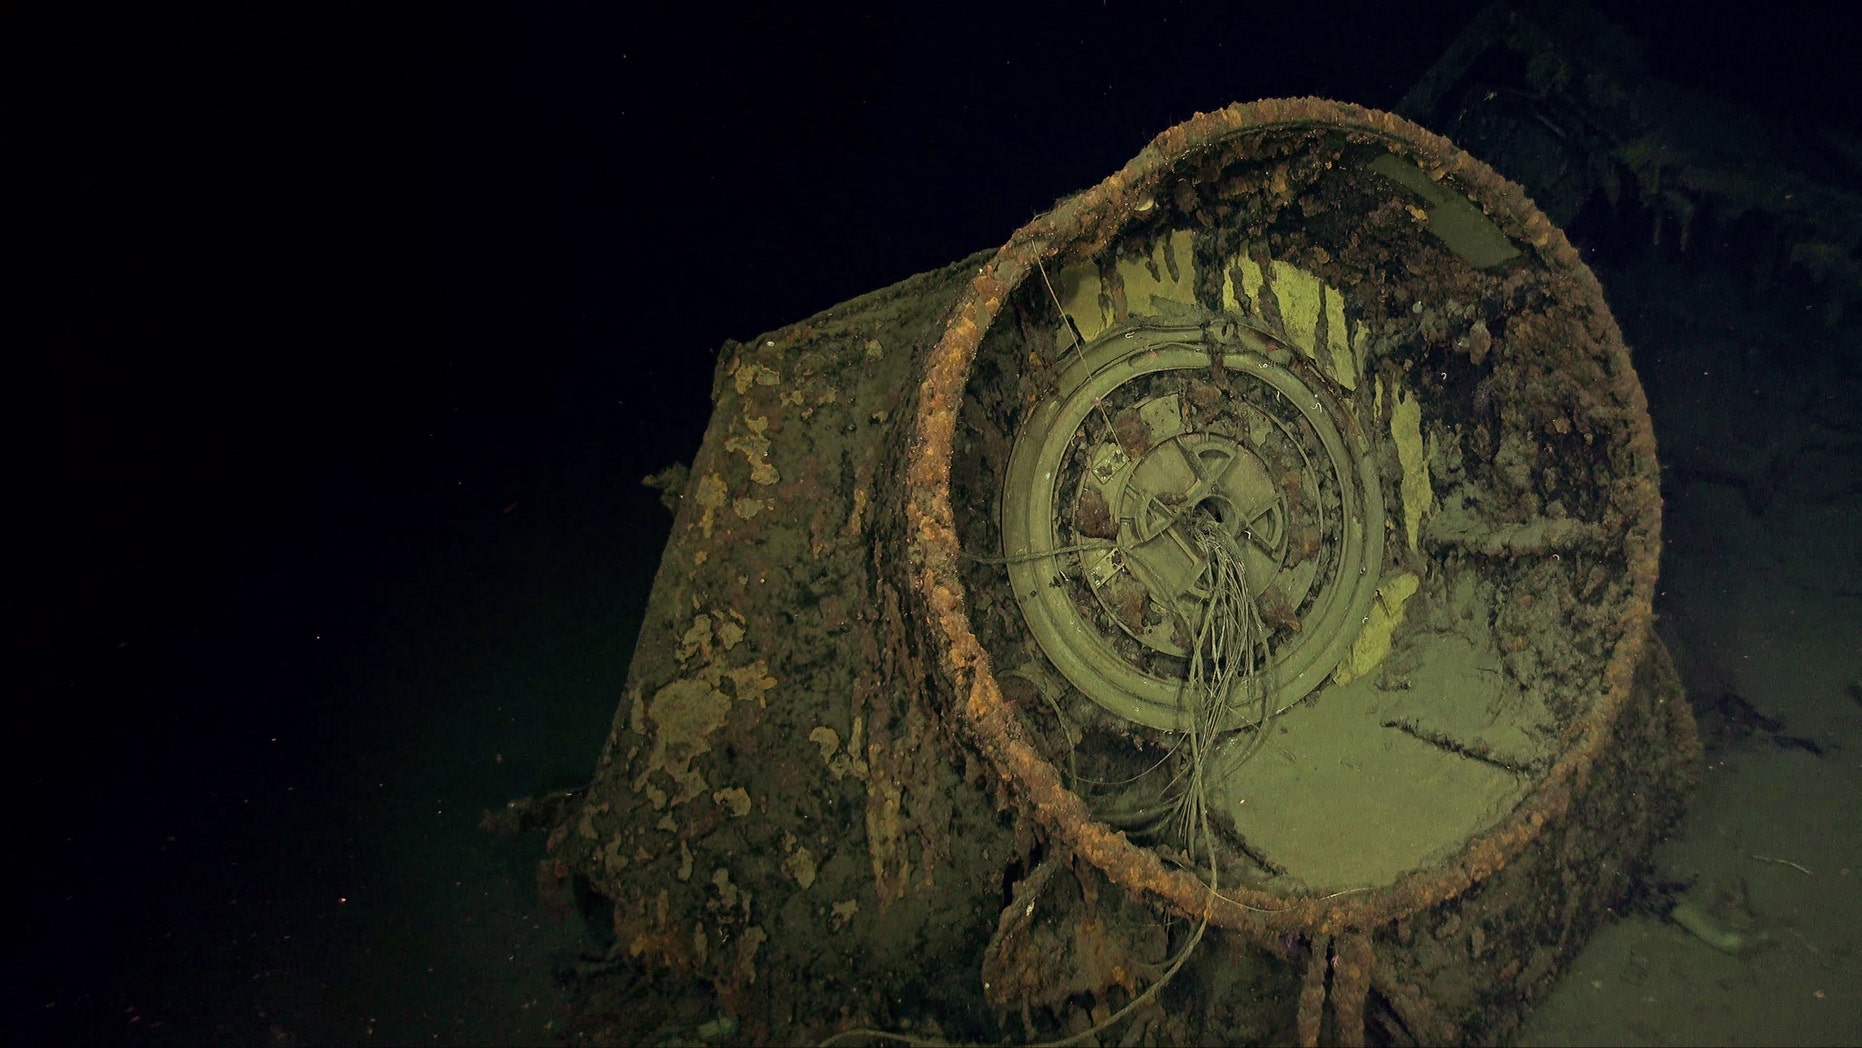 The Hiei was one of the first Japanese battleships sunk by U.S. forces in World War II